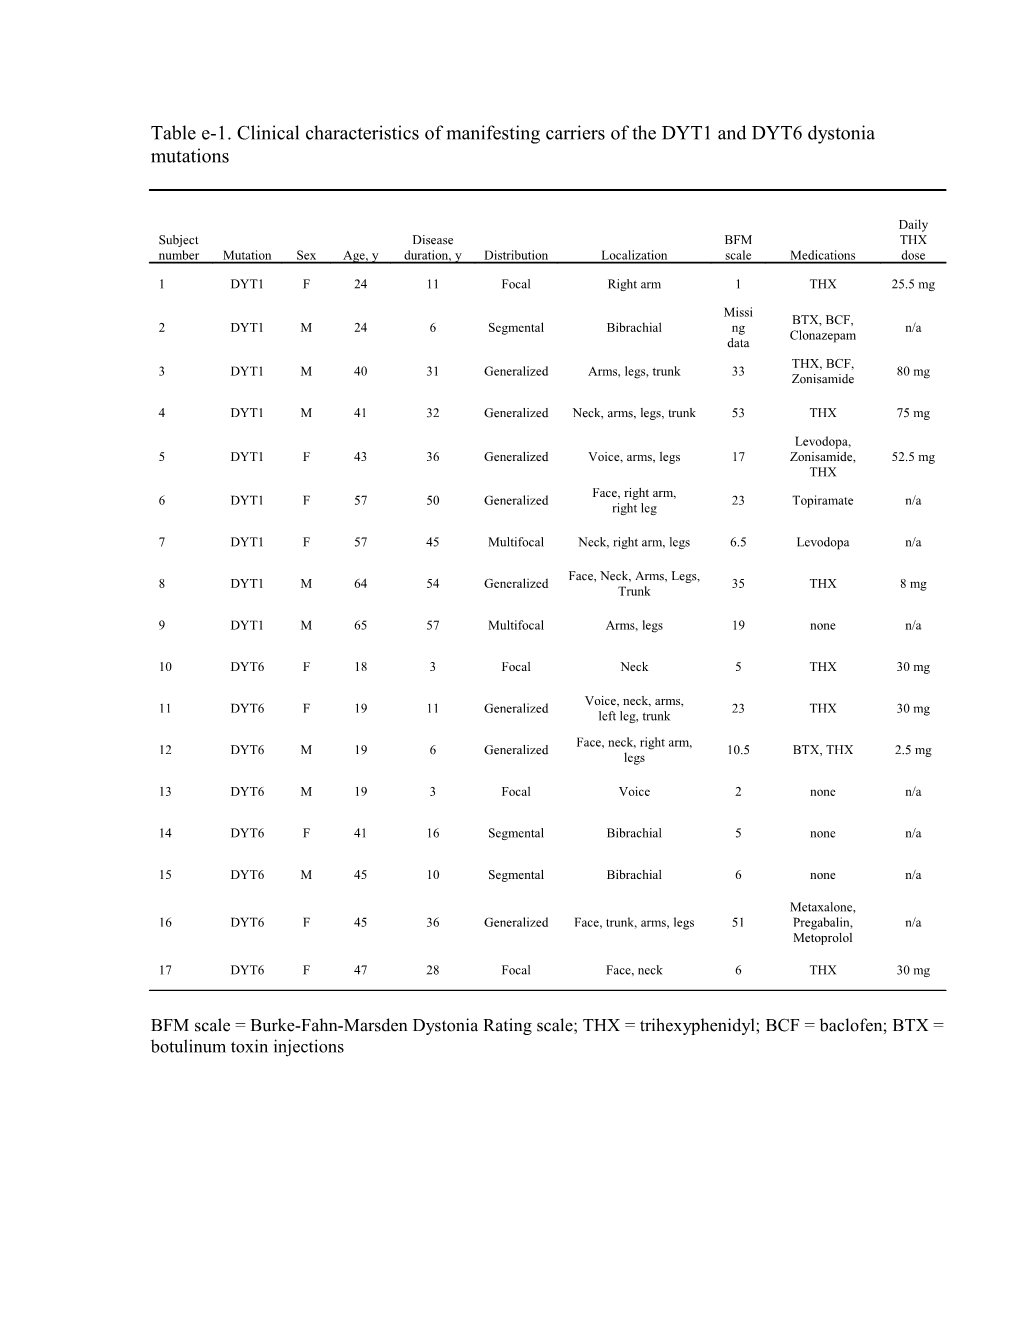 Table E-1.Clinical Characteristics of Manifesting Carriers of the DYT1 and DYT6 Dystonia